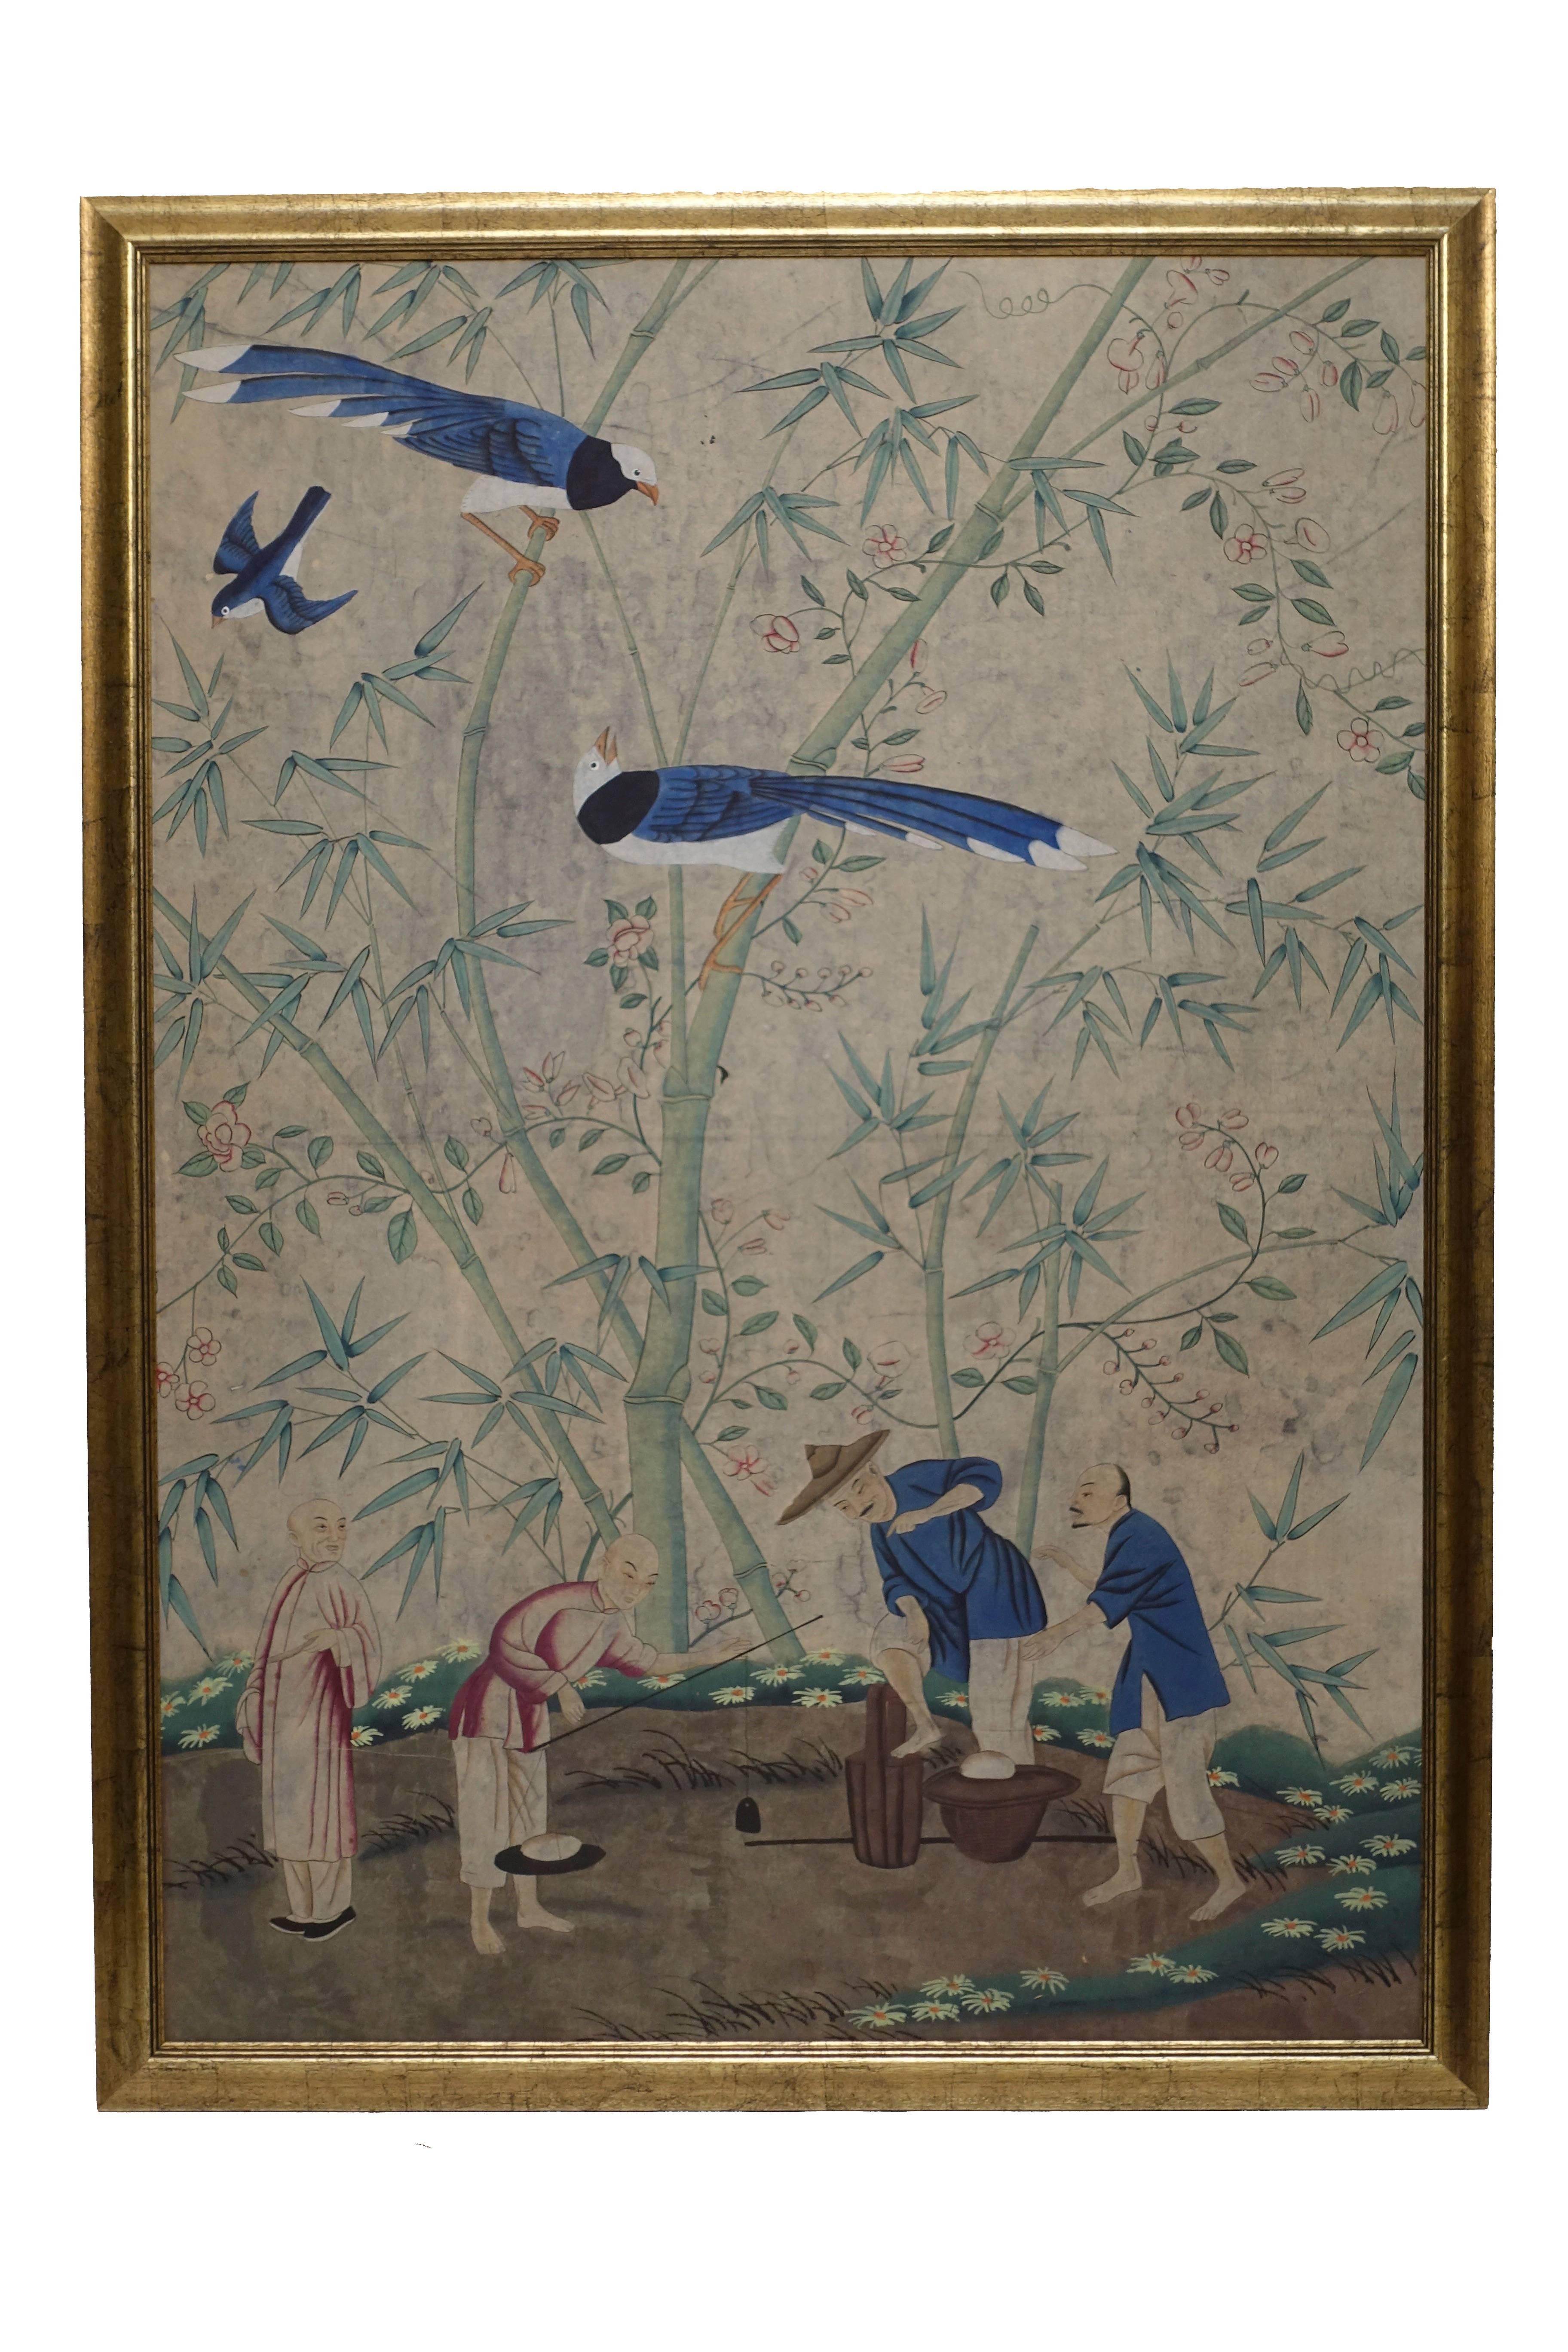 A framed Chinese wall paper panel, hand-painted with scene of birds, figures and bamboo. China, mid-20th century, circa 1960.